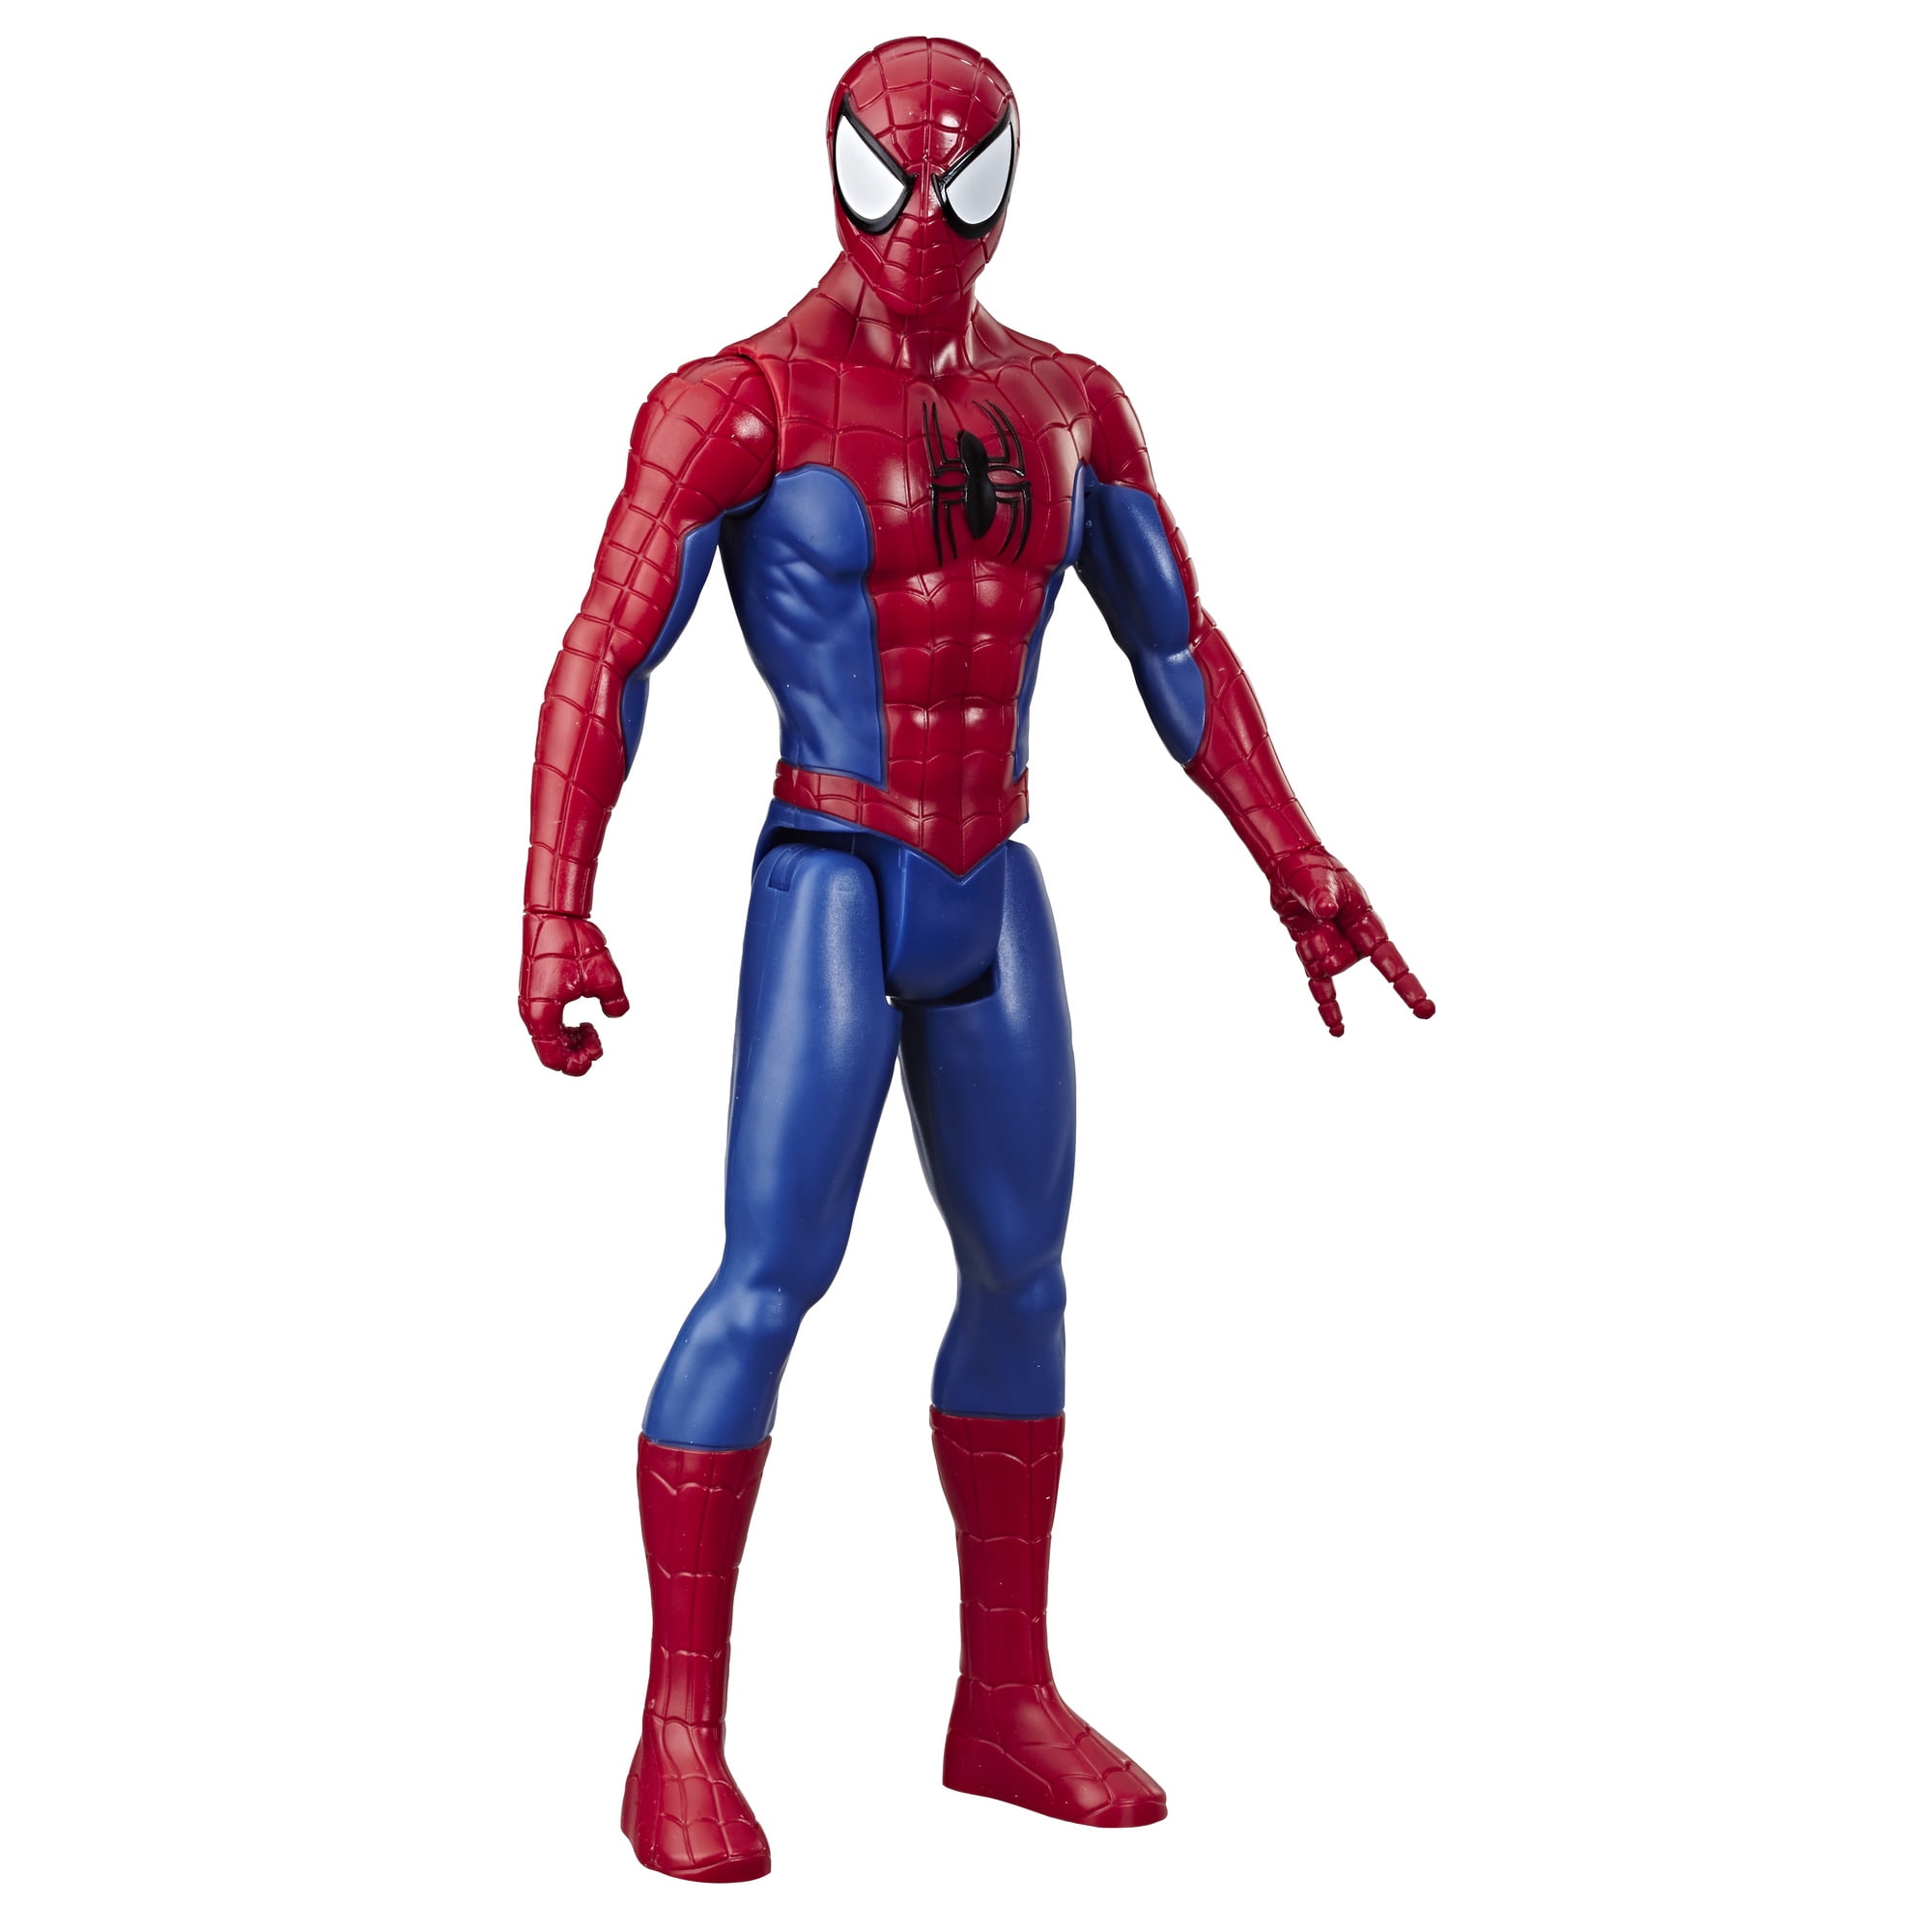 QUALITY KIDS TOY GIFT THE AMAZING SPIDER-MAN SUPER HERO SERIES ACTION FIGURE 